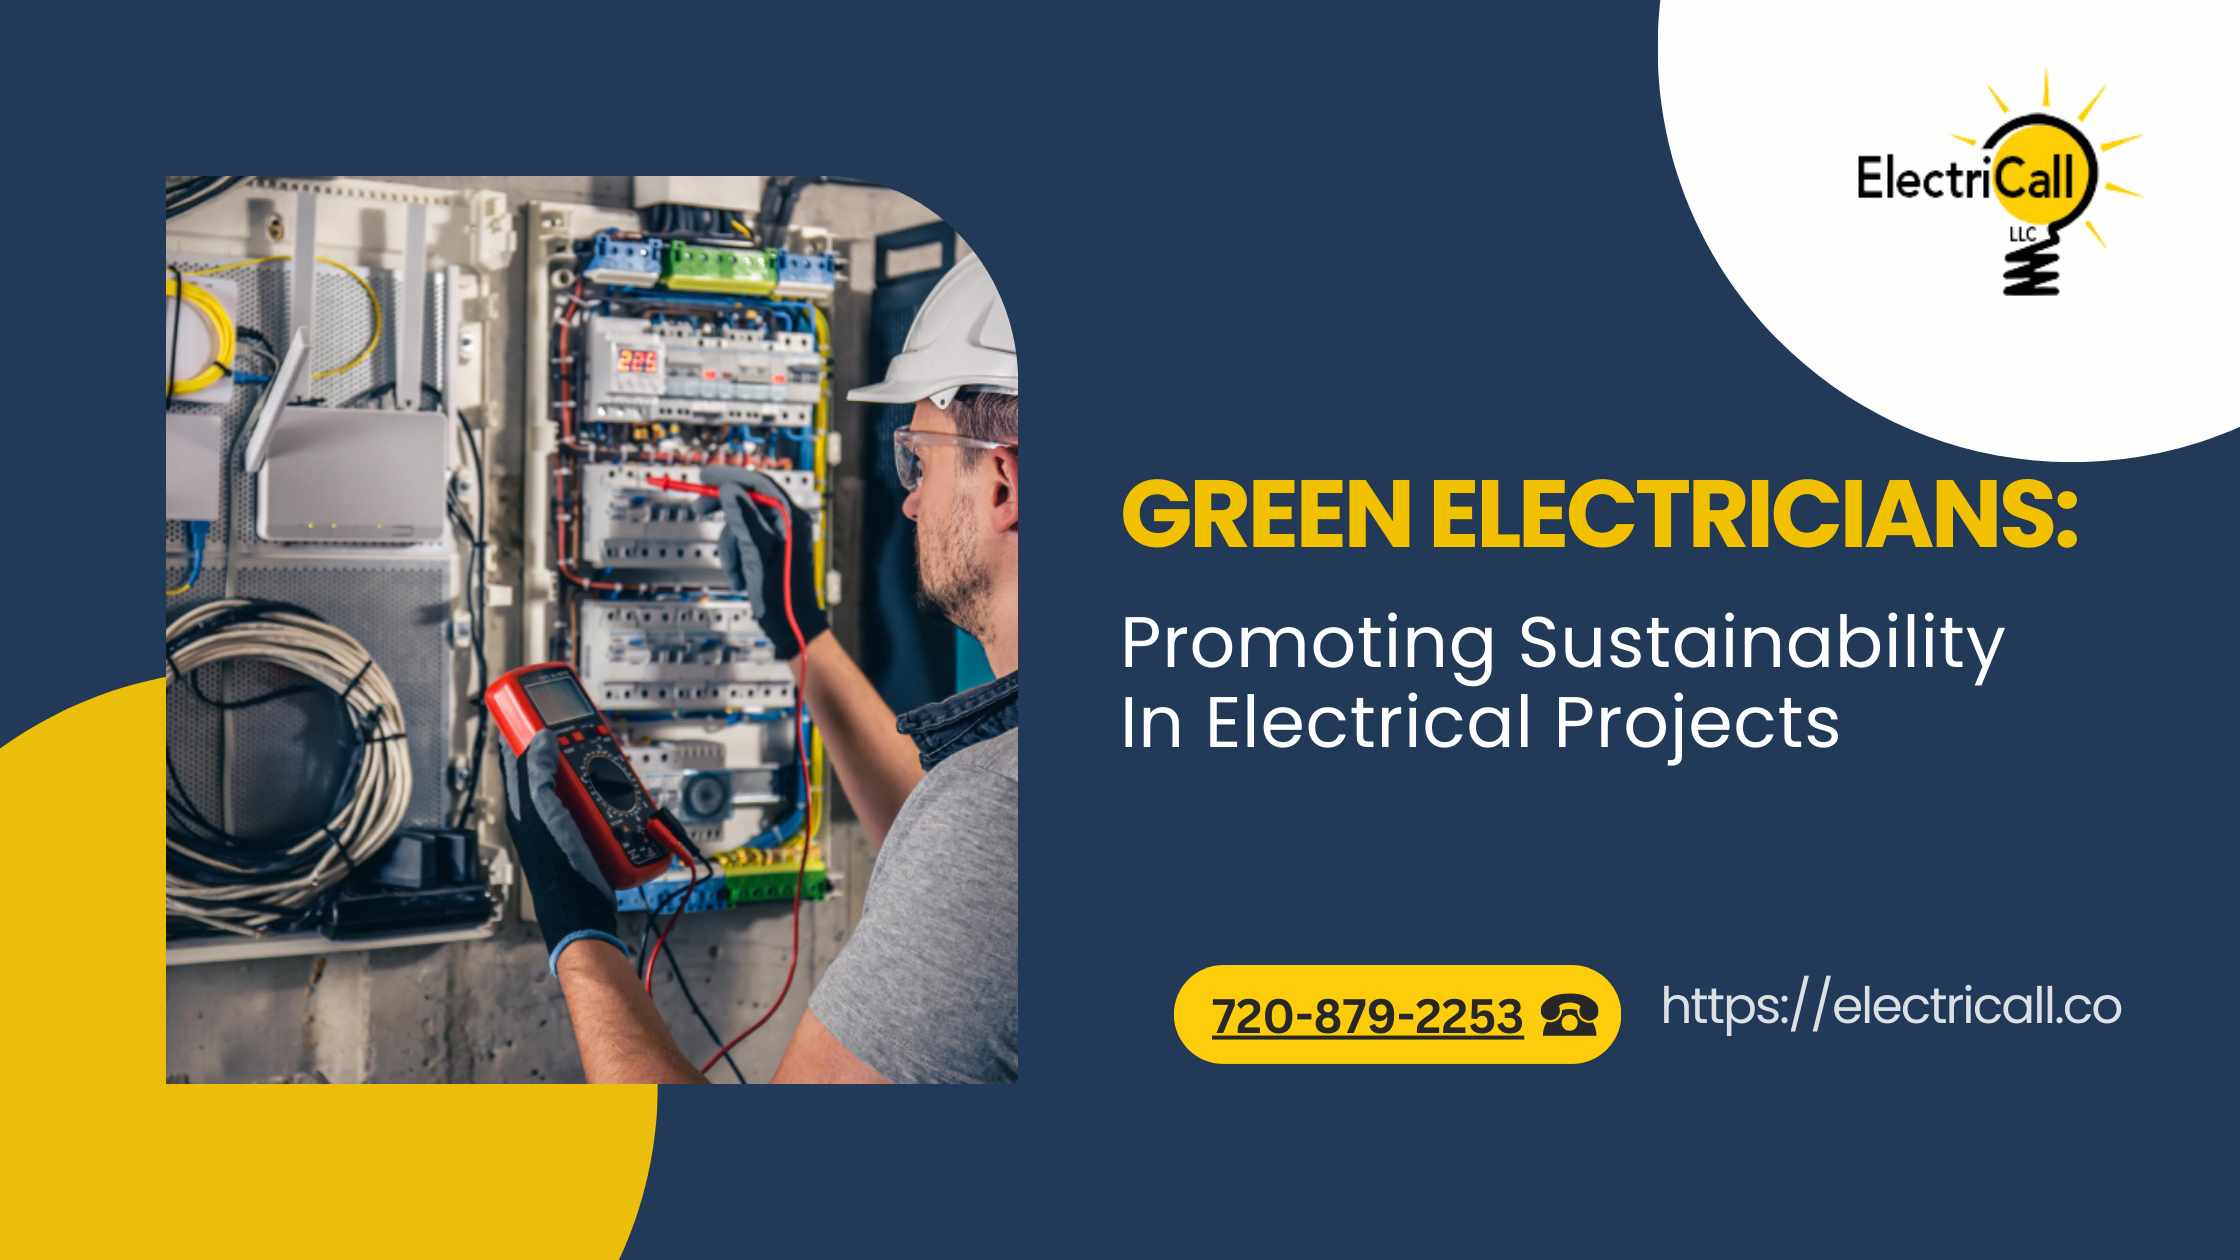 Green Electricians: Promoting Sustainability In Electrical Projects - Electricall